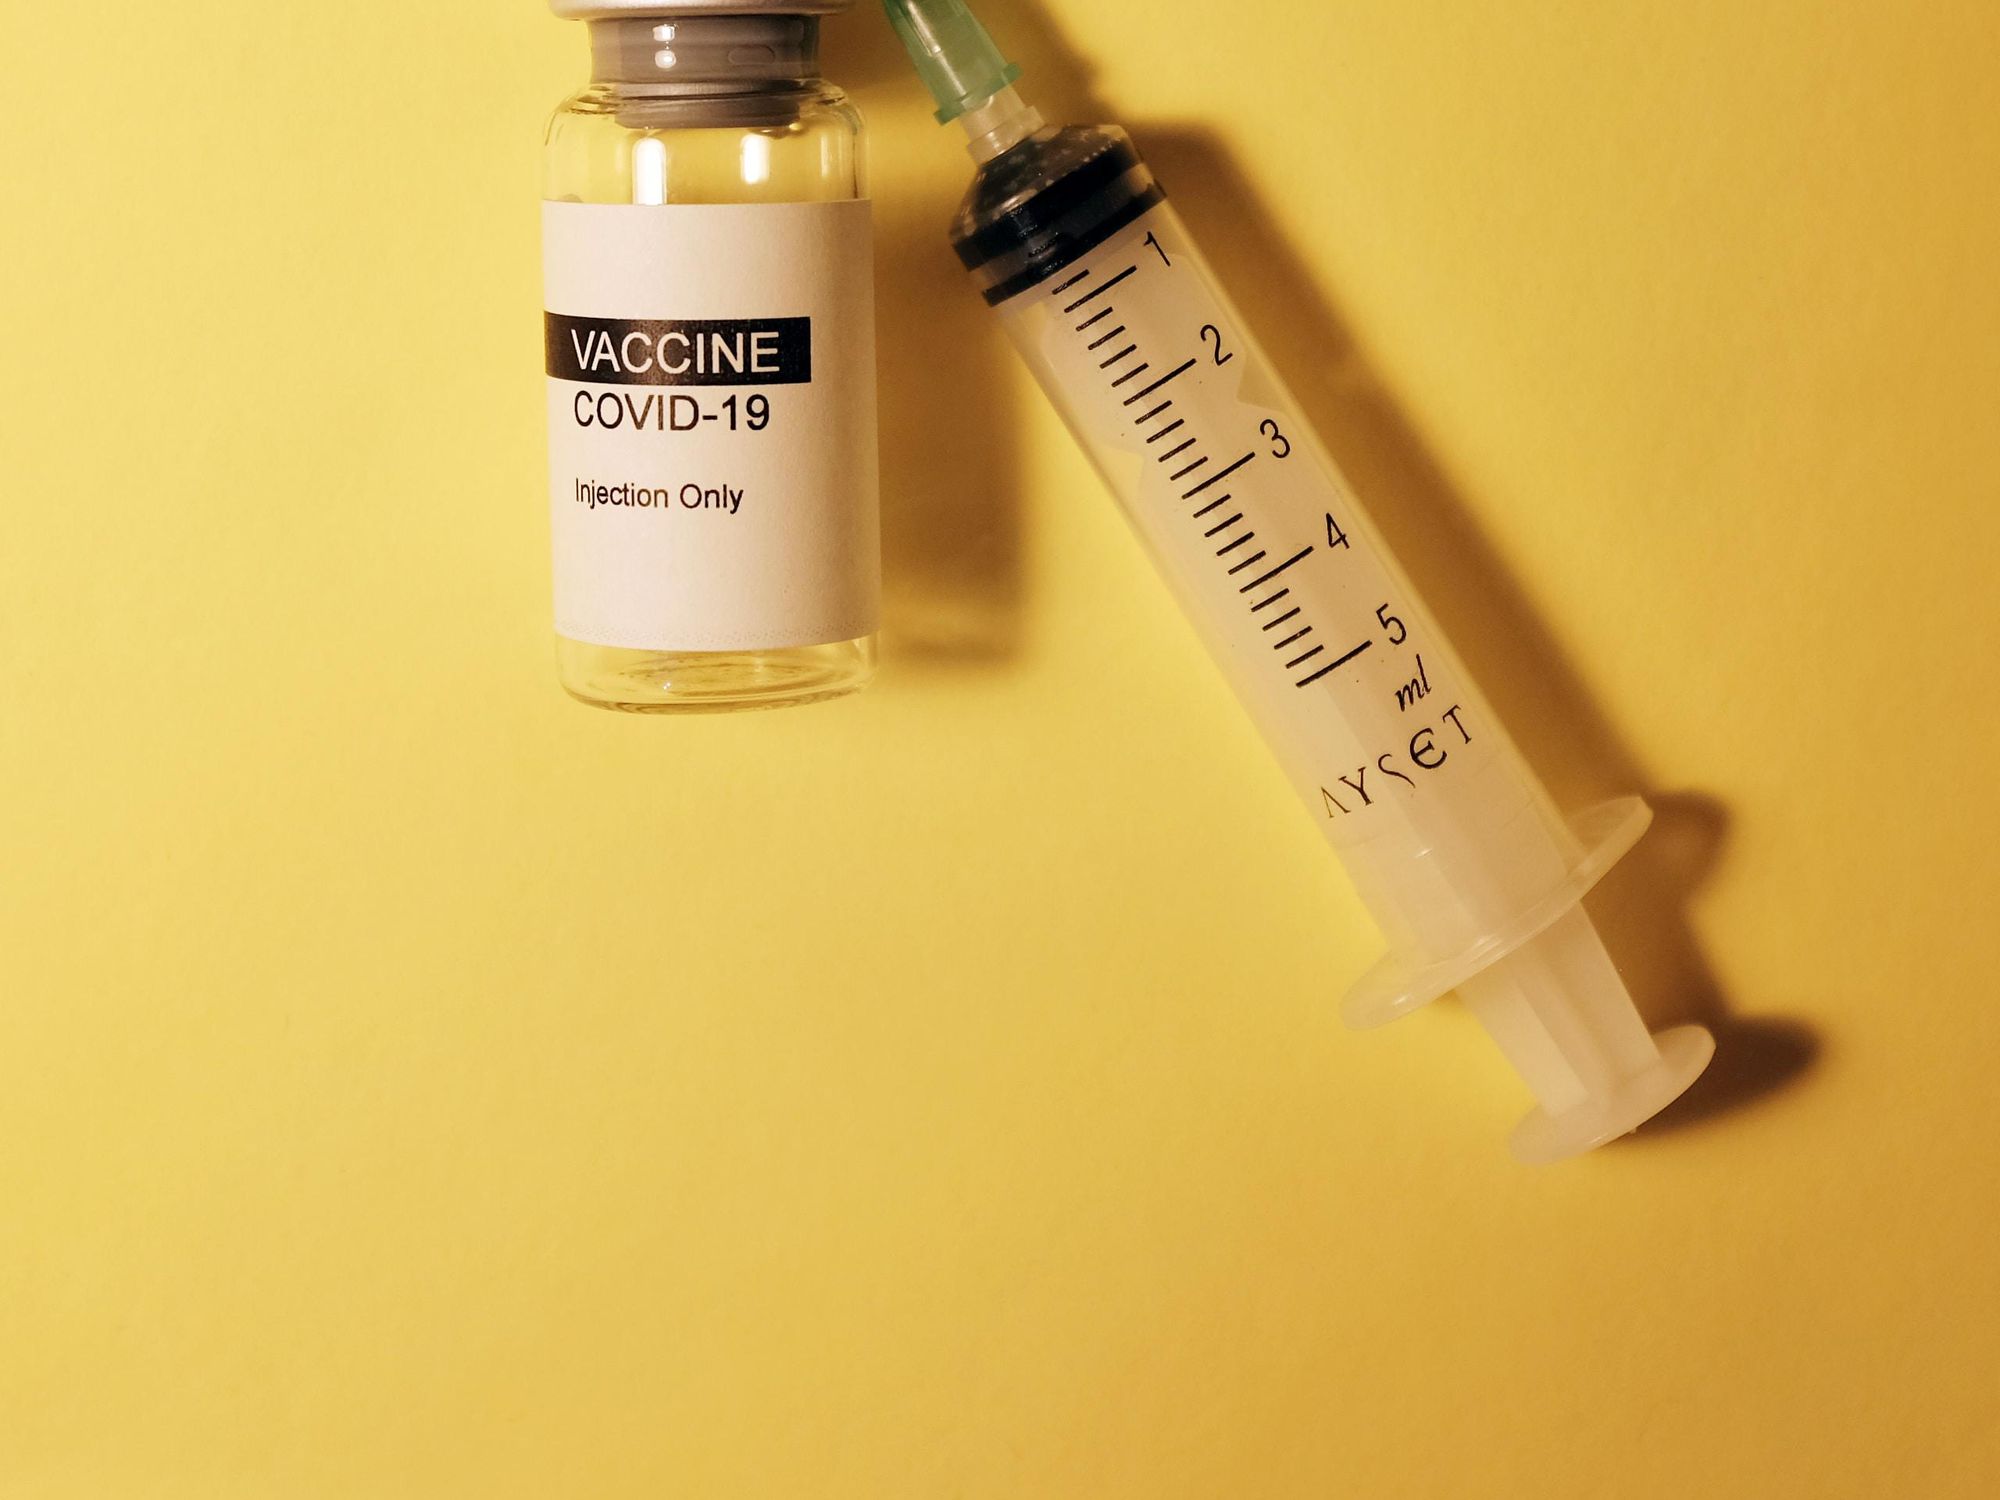 Pfizer or Moderna? Here's How to Find the COVID Vaccine You Want